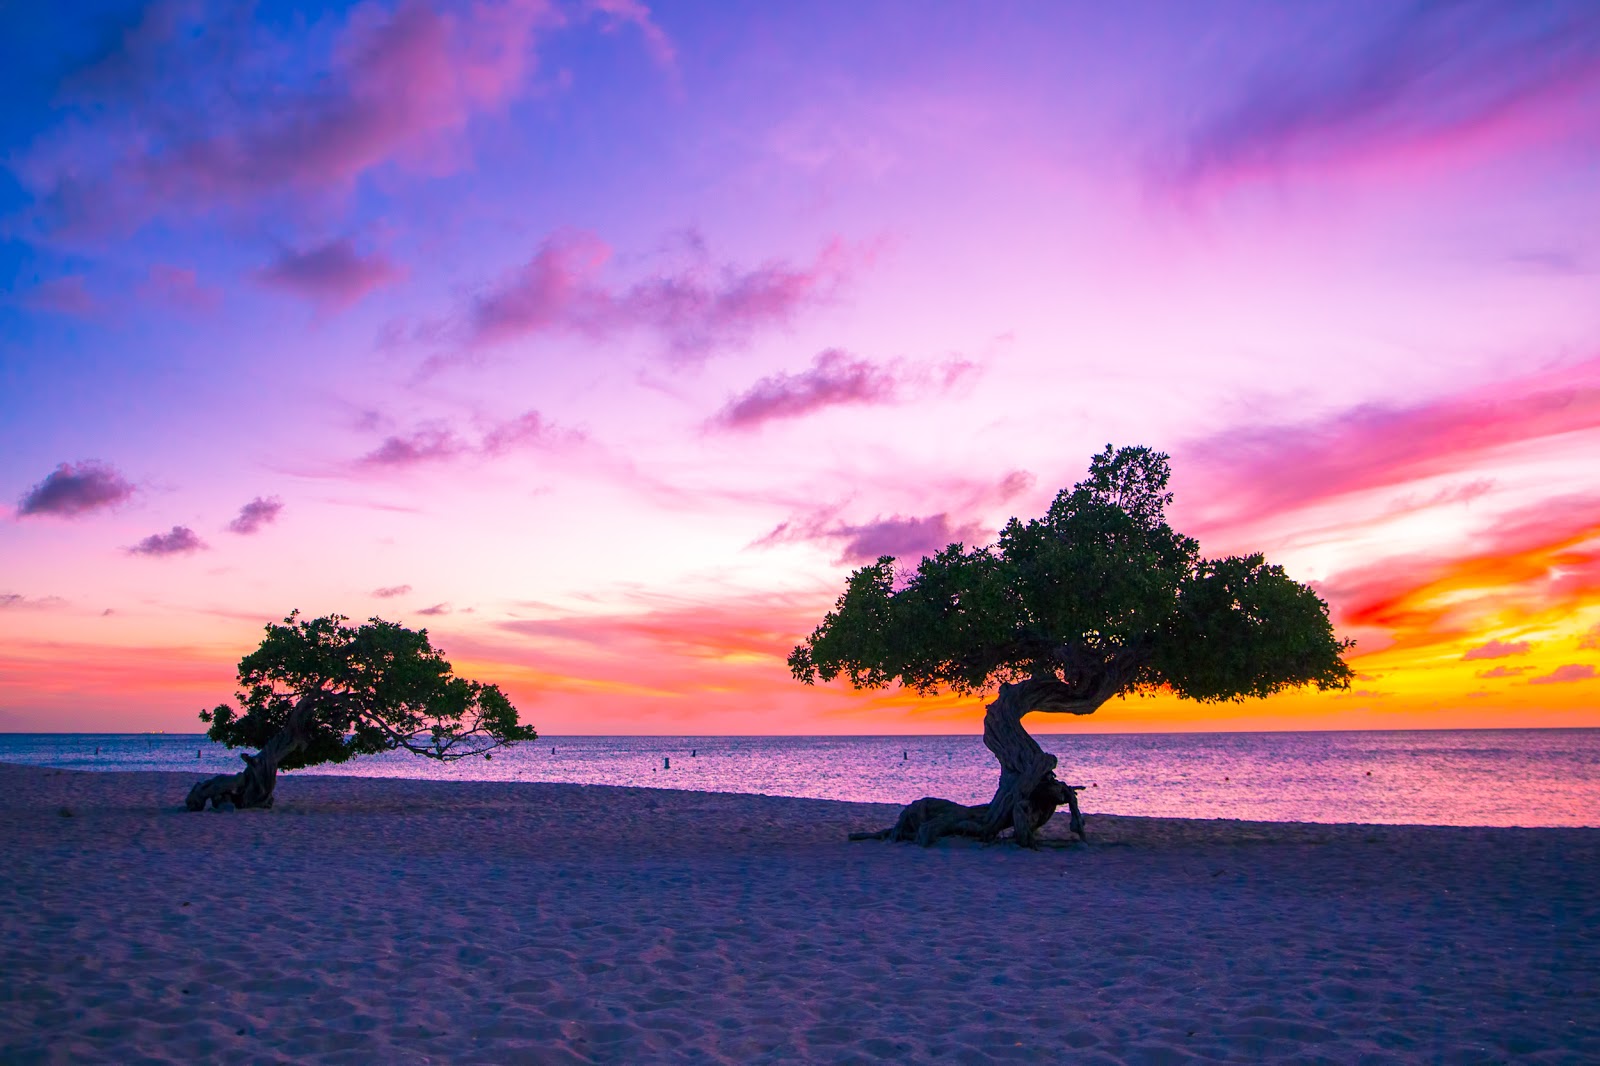 trees on a beach at sunset